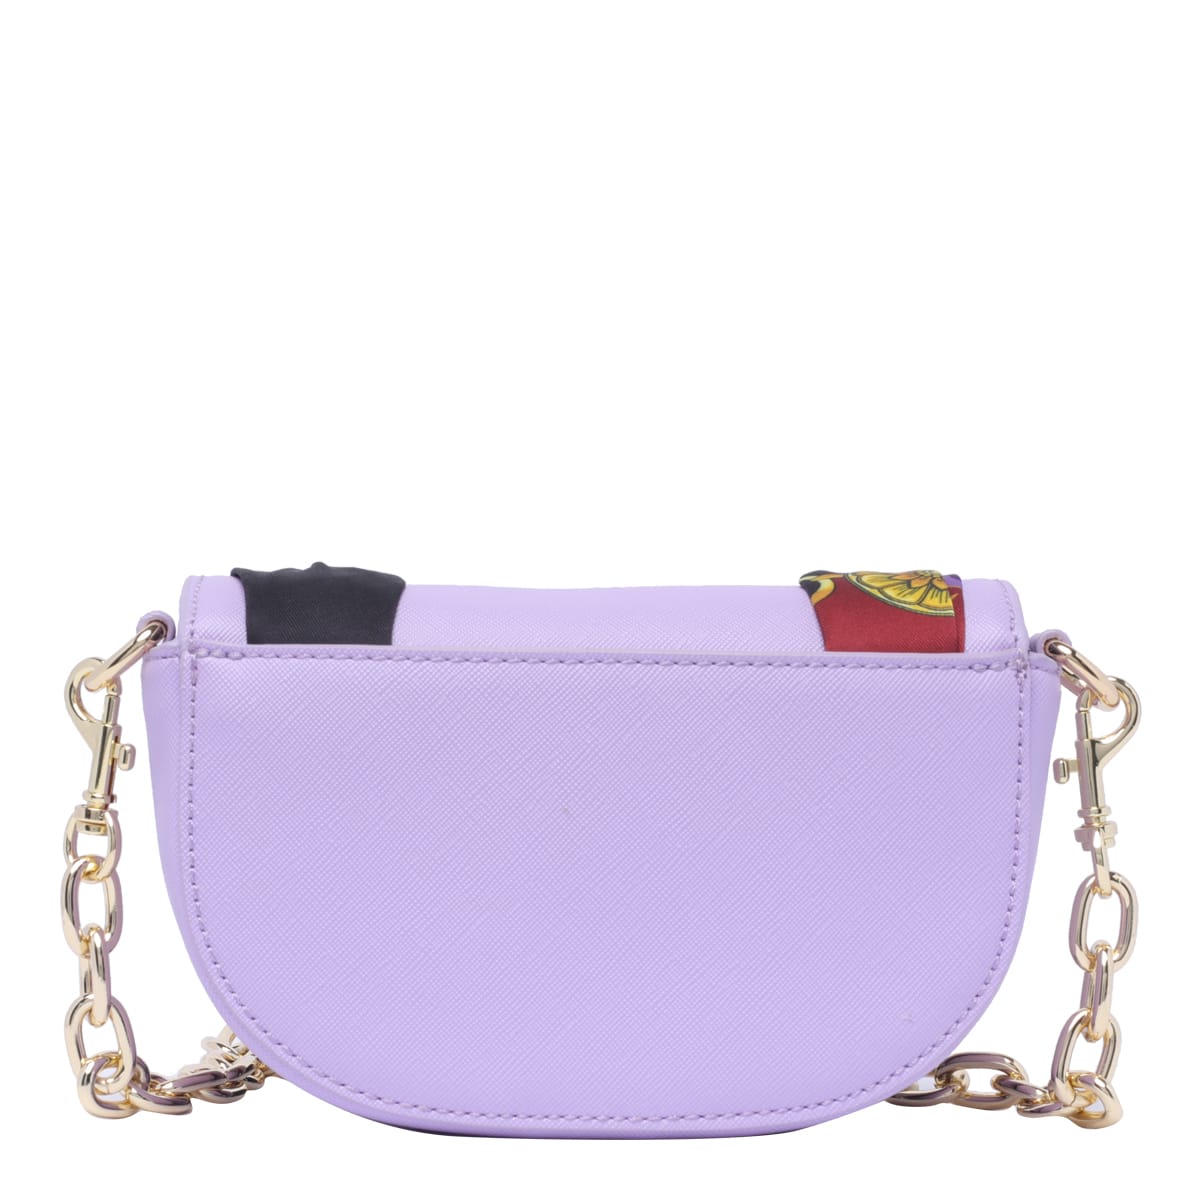 Shop Versace Jeans Couture Crossbody Bag In Purple